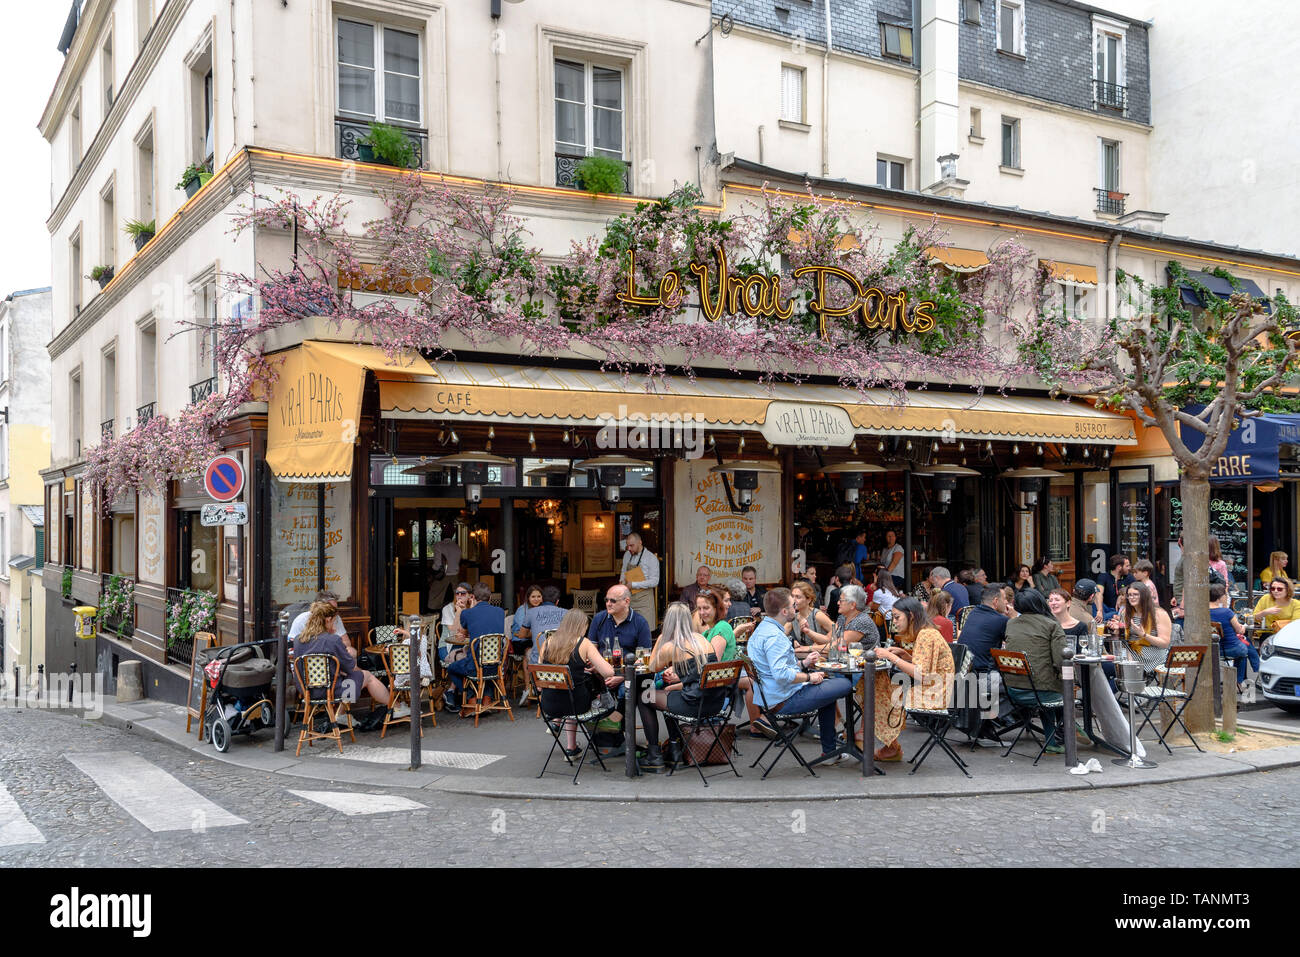 People sitting outside on the terrace of Le Vrai Paris cafe Stock Photo